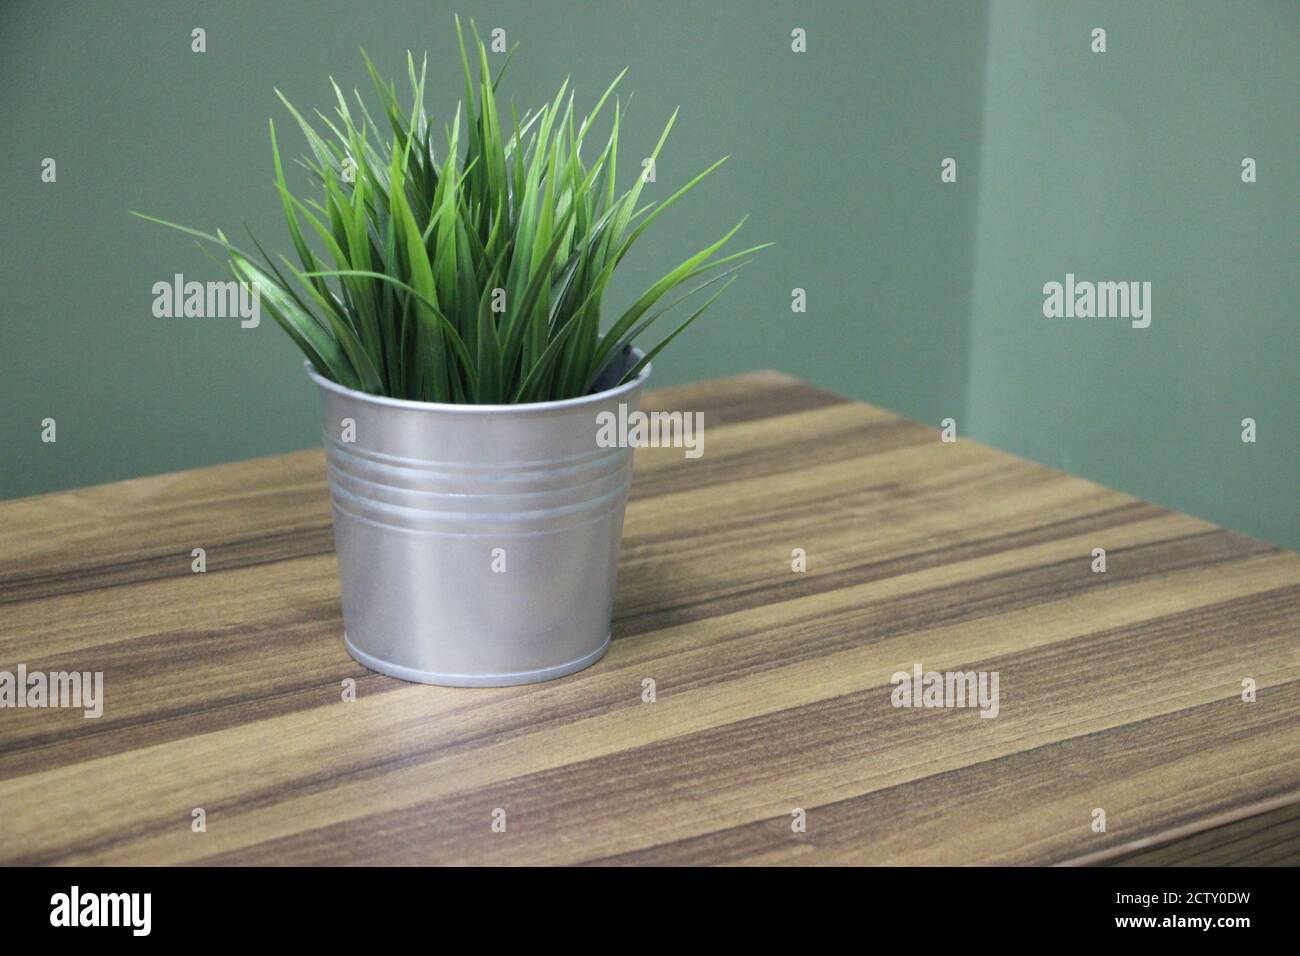 The grass in metal pot on wooden table in room interior Stock Photo